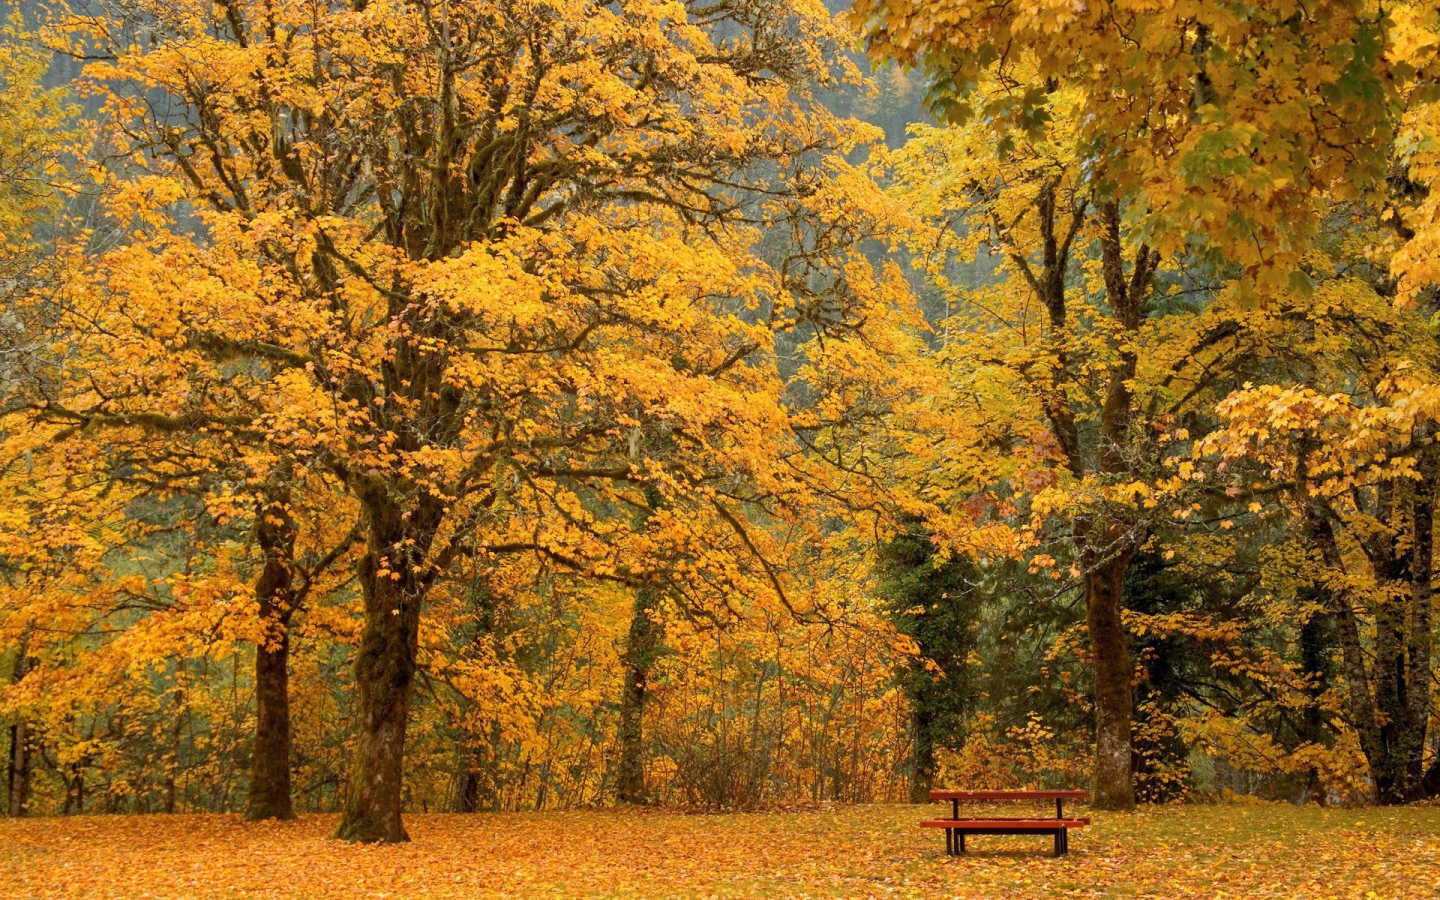 Bench under a yellow trees